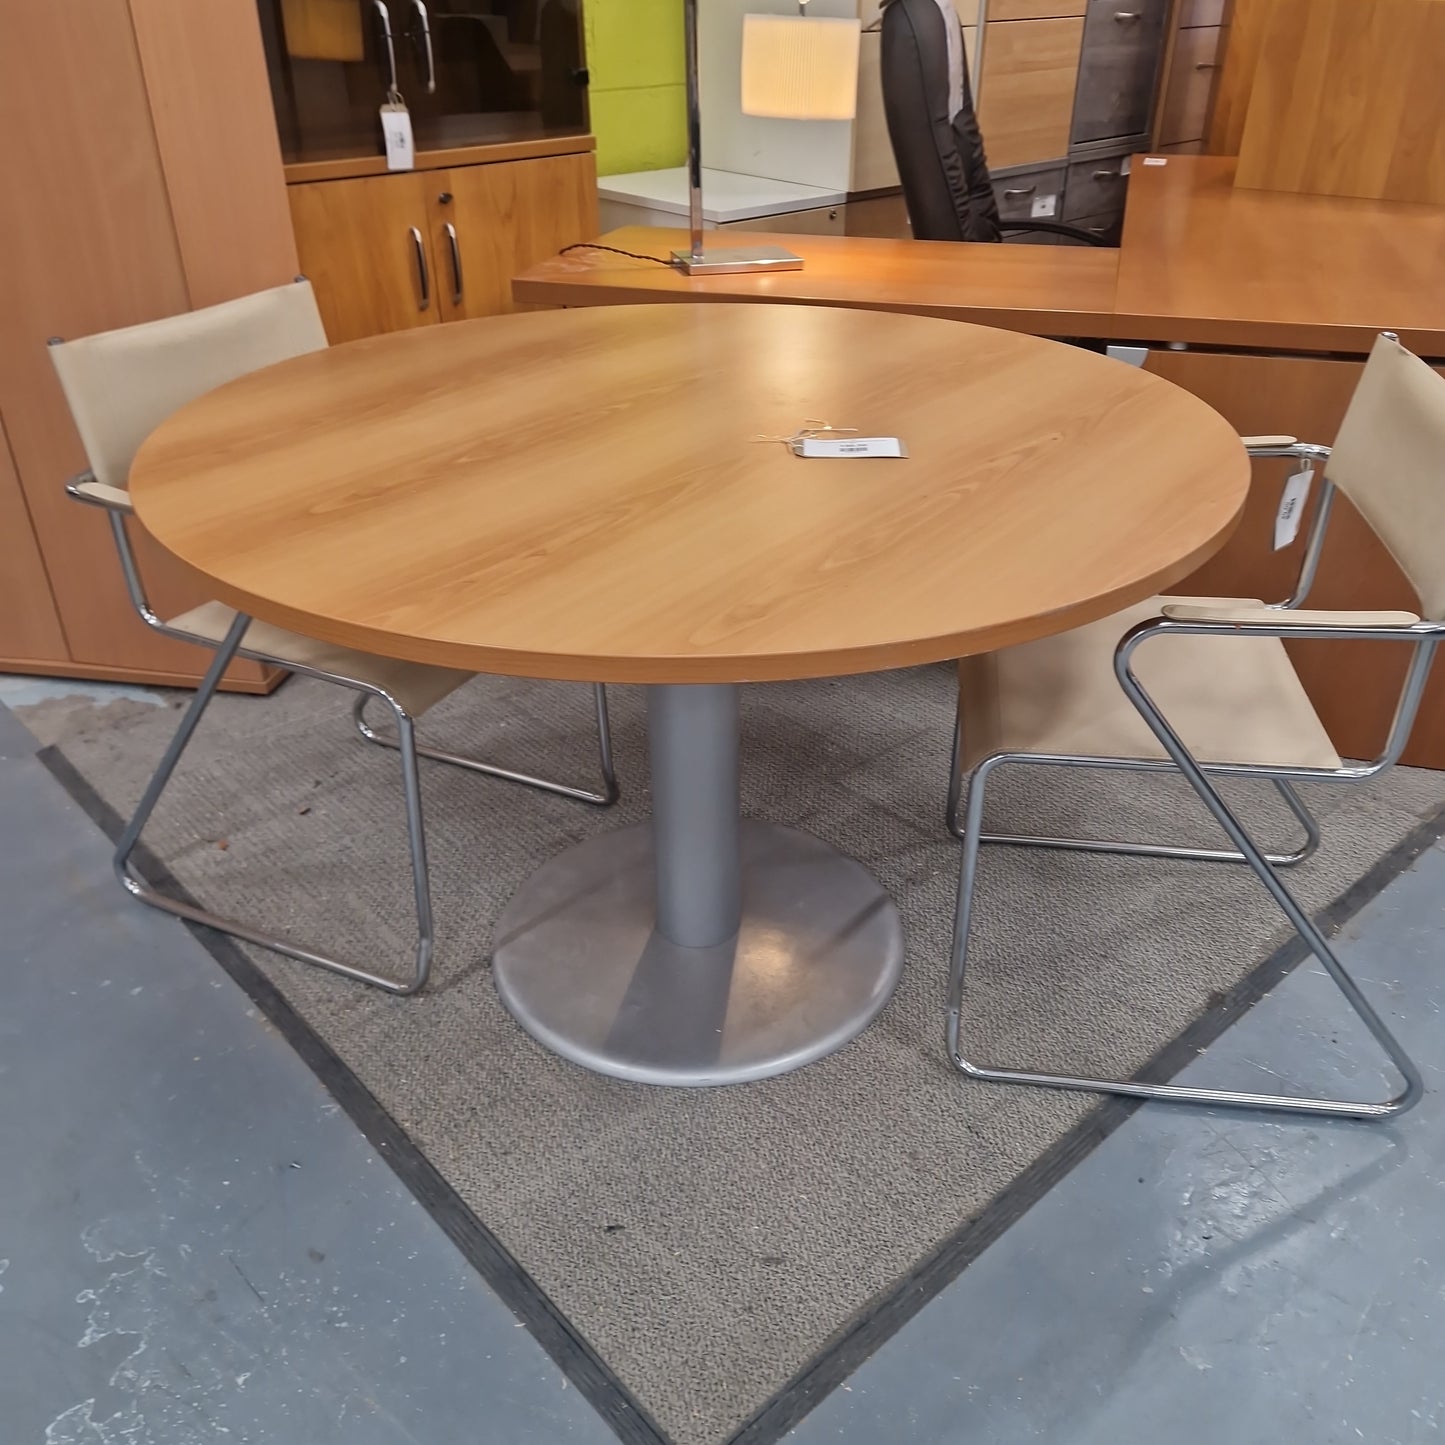 Circular cherry 1200W meeting table cw central metal base